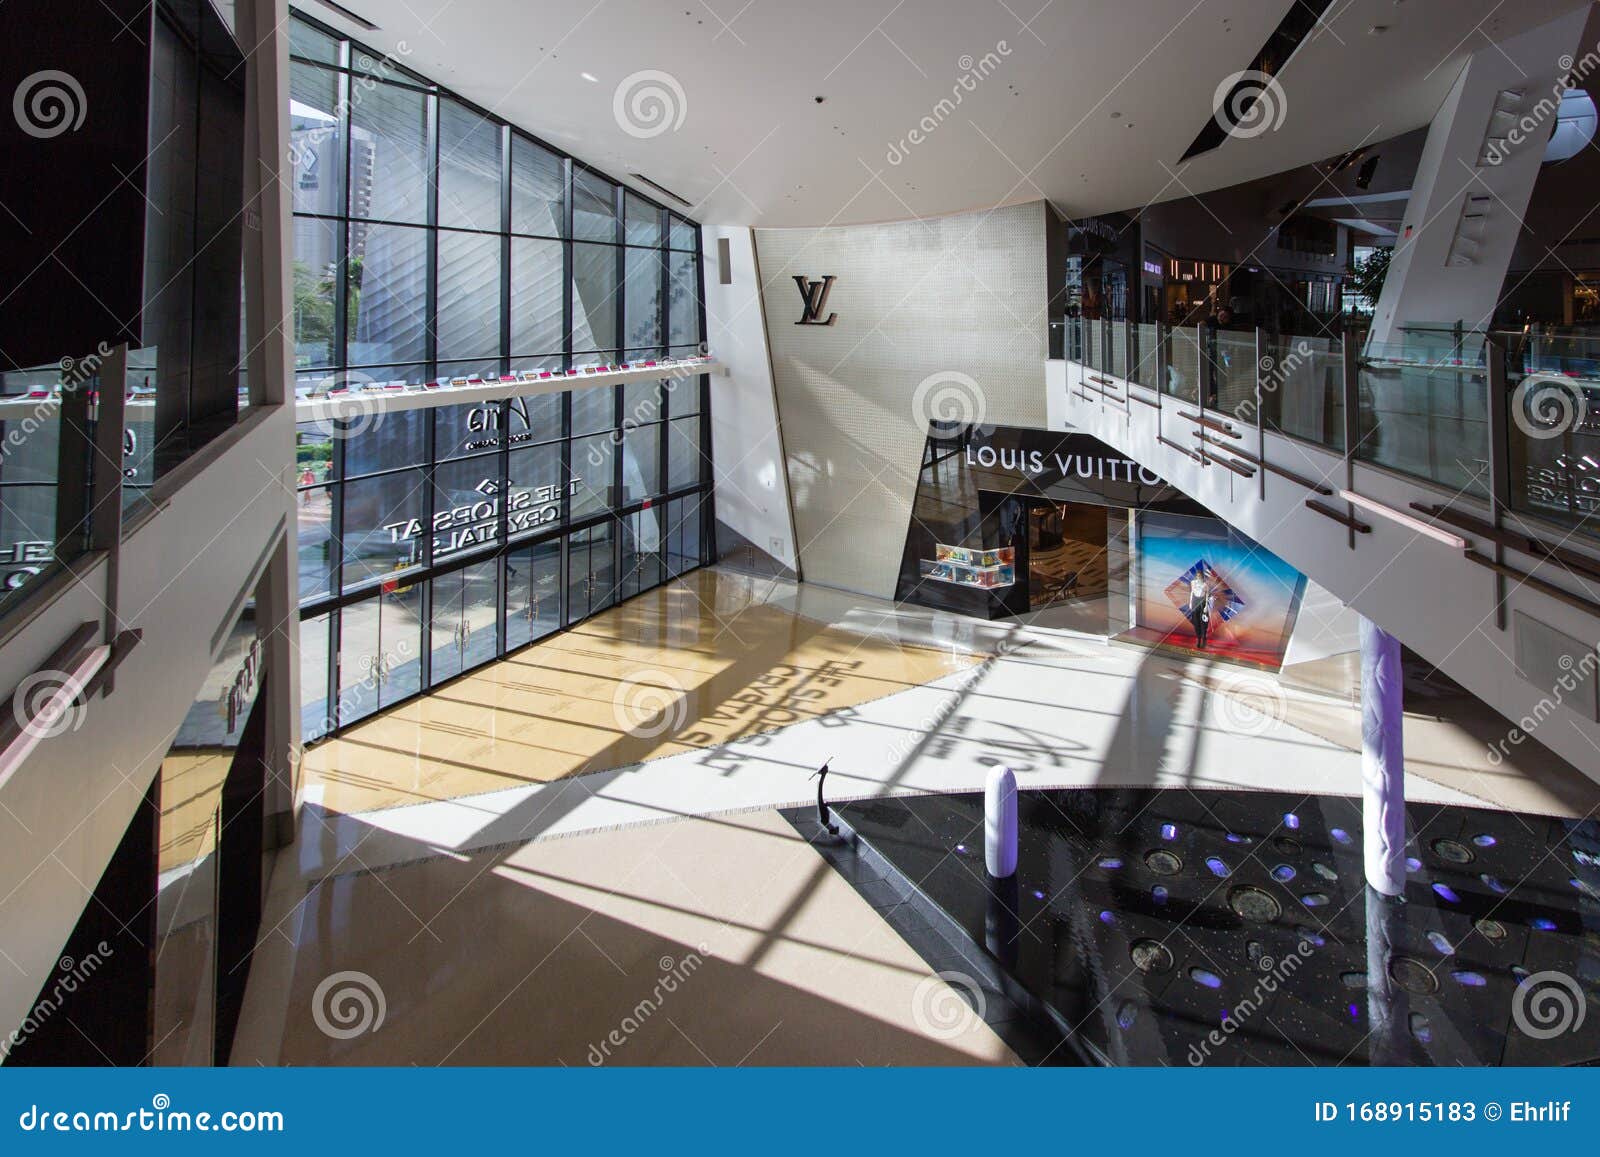 Louis Vuitton At The Crystals Shops In Las Vegas Editorial Stock Photo - Image of entrance ...